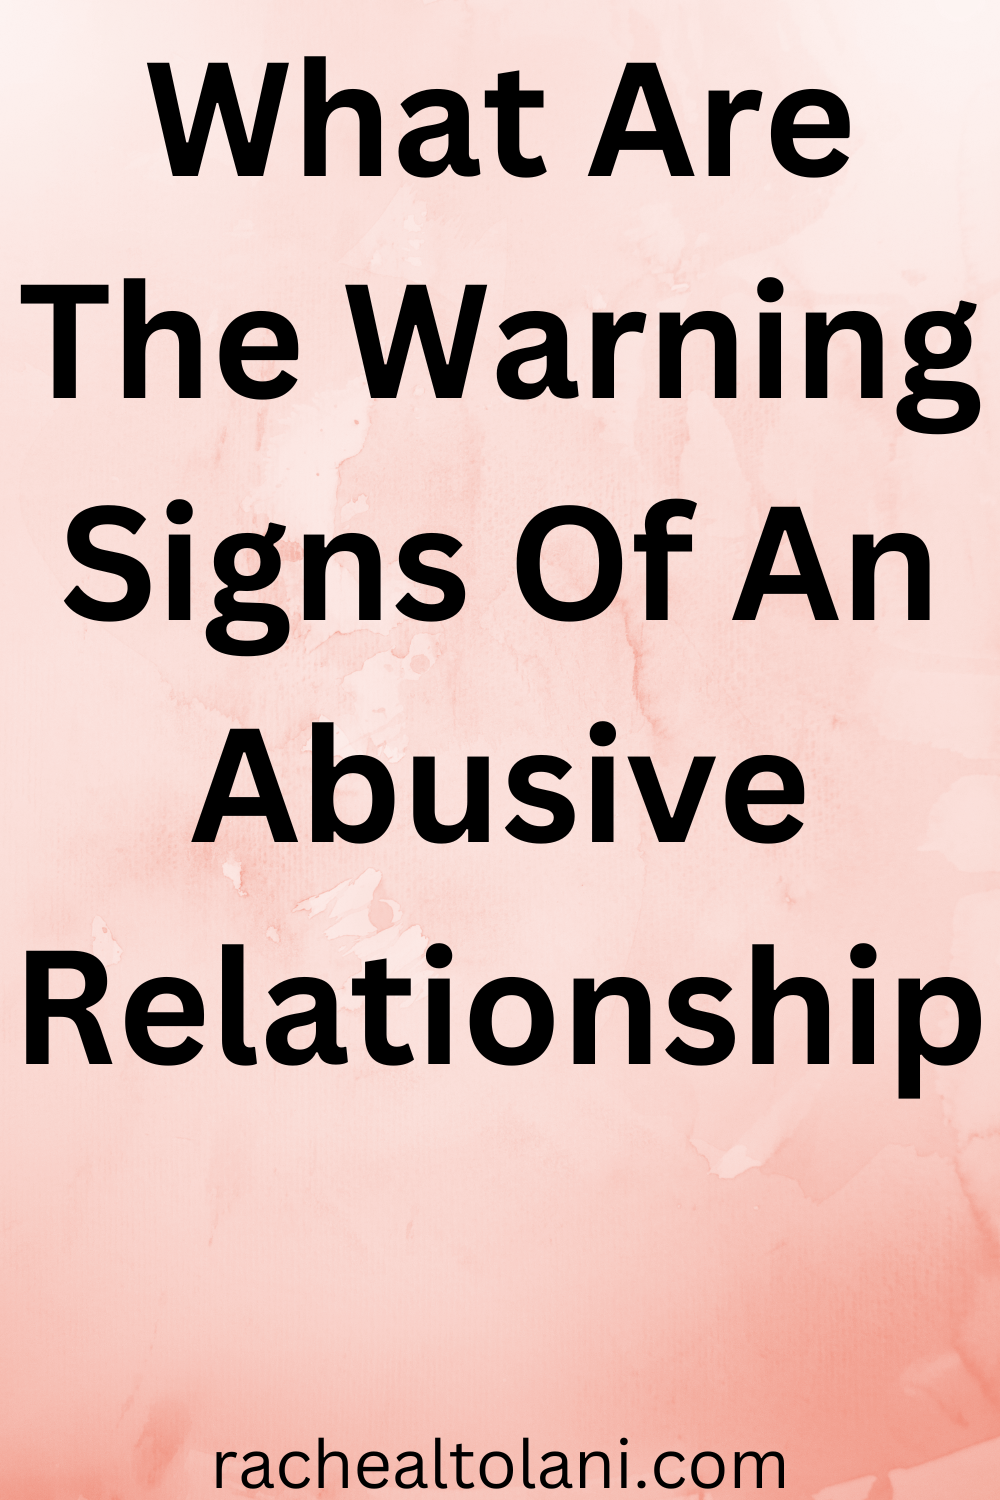 Signs of abuse in a relationship